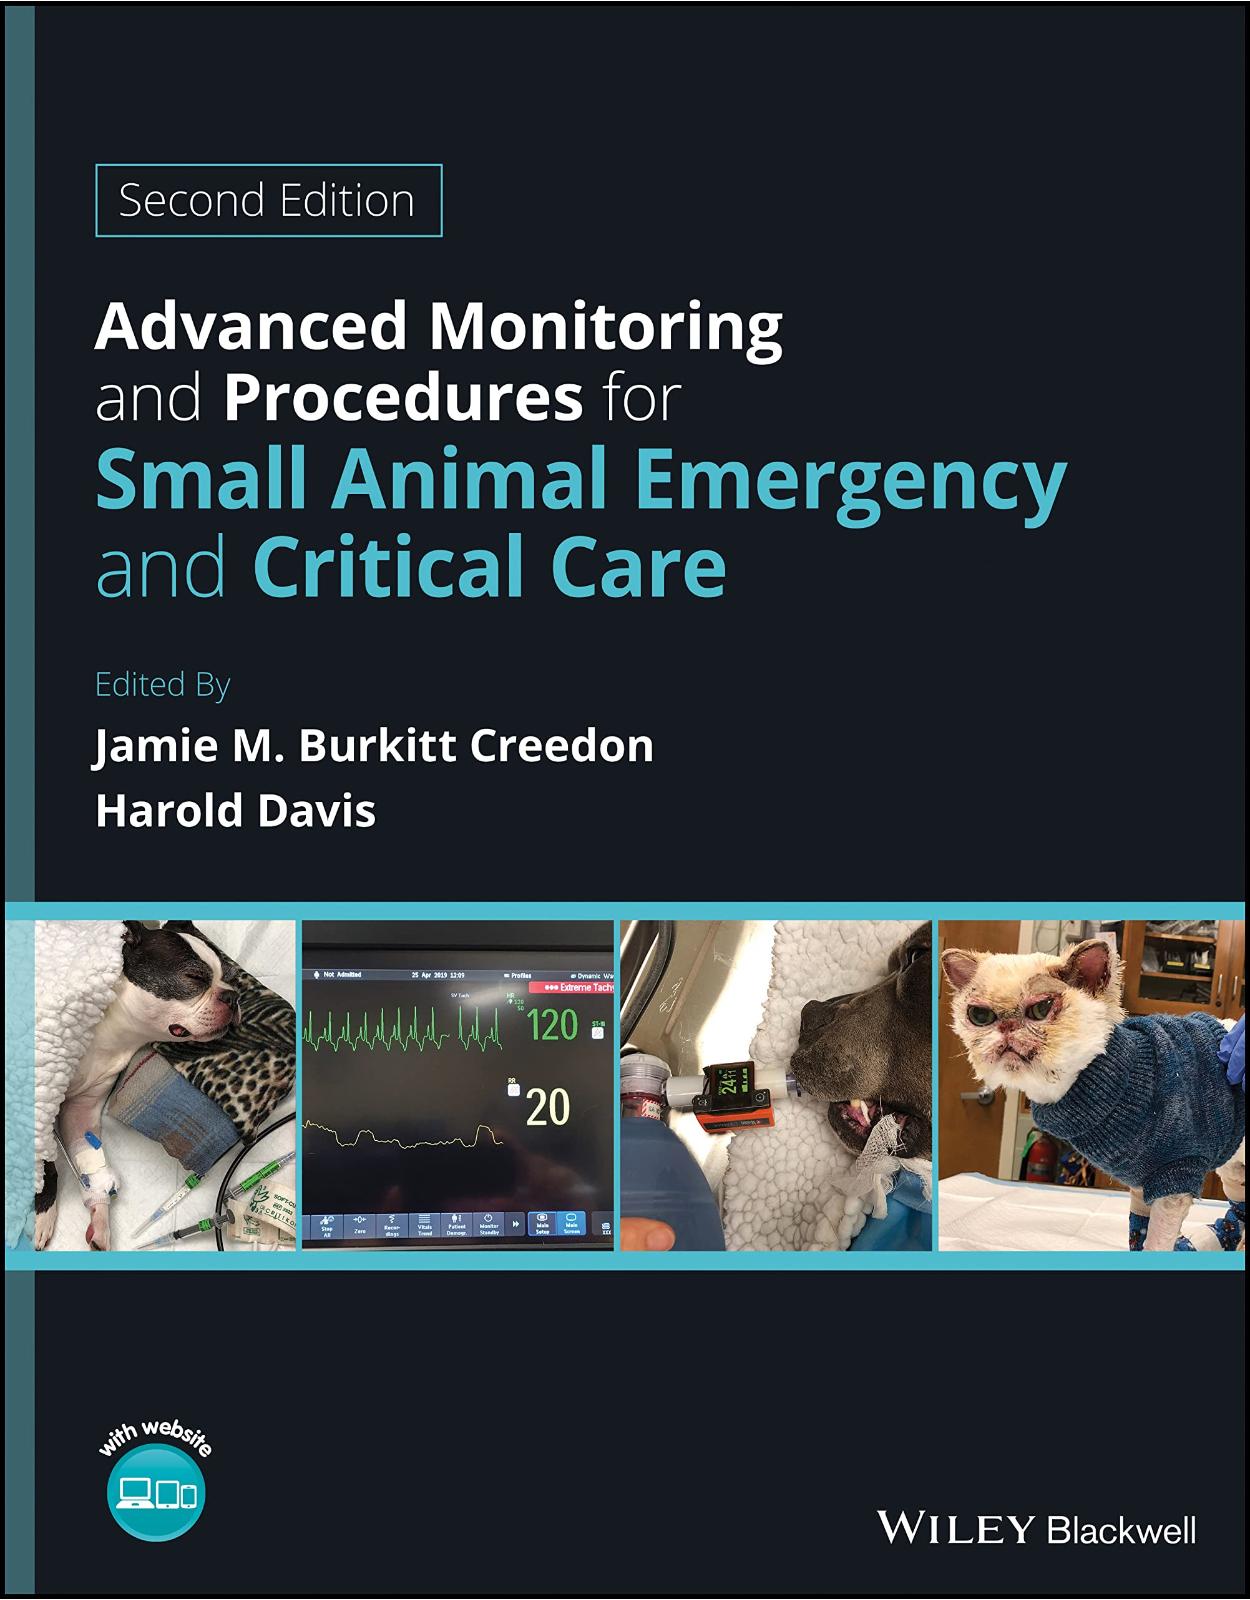 Advanced Monitoring and Procedures for Small Anima l Emergency and Critical Care